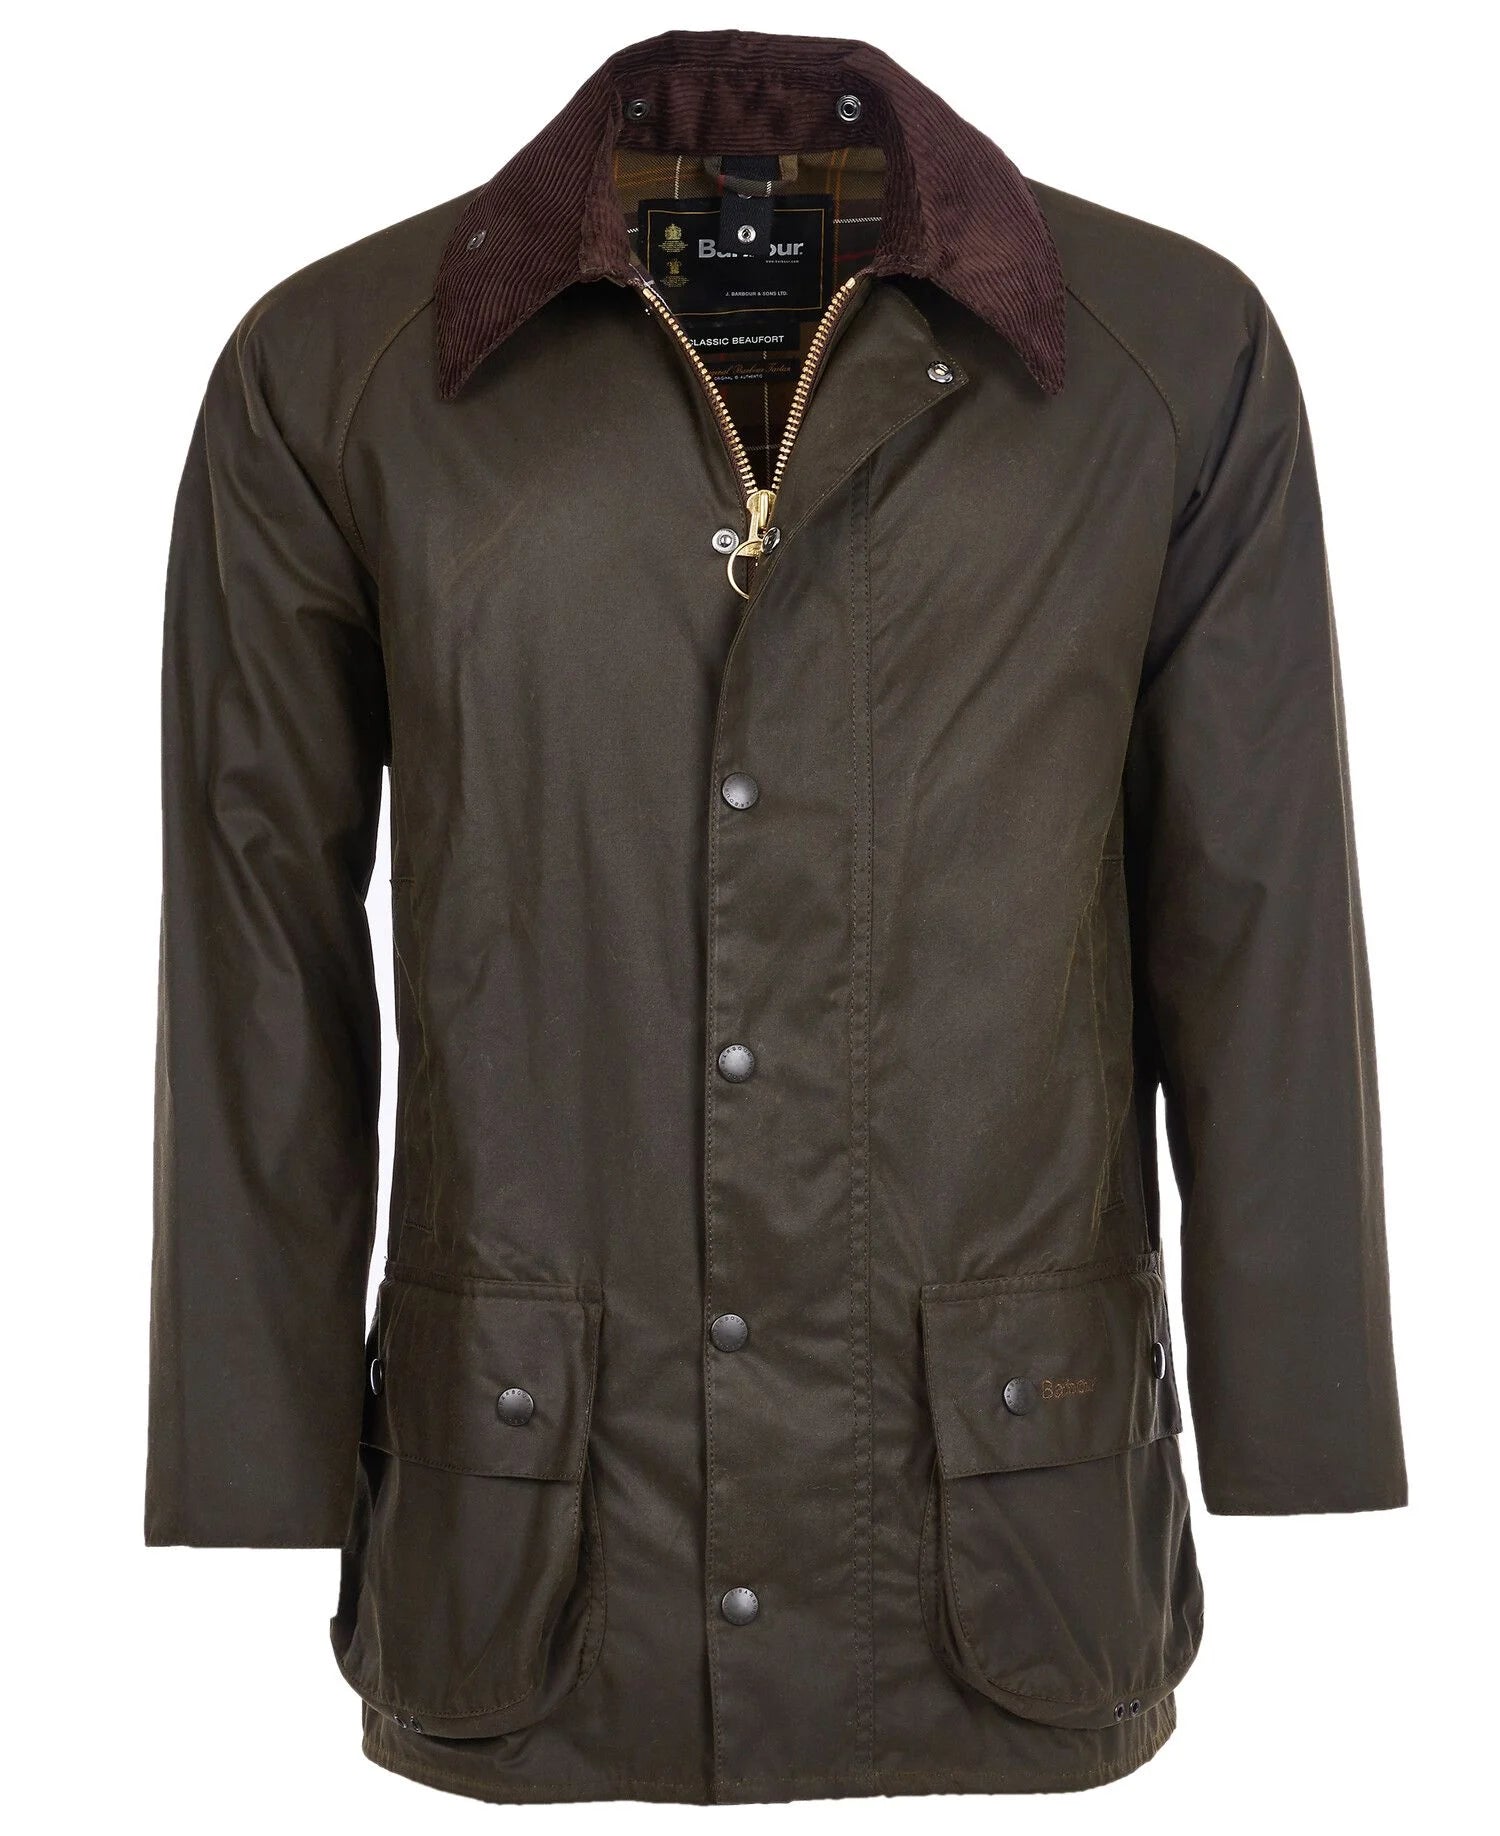 Barbour 40th Anniversary Beaufort Jacket